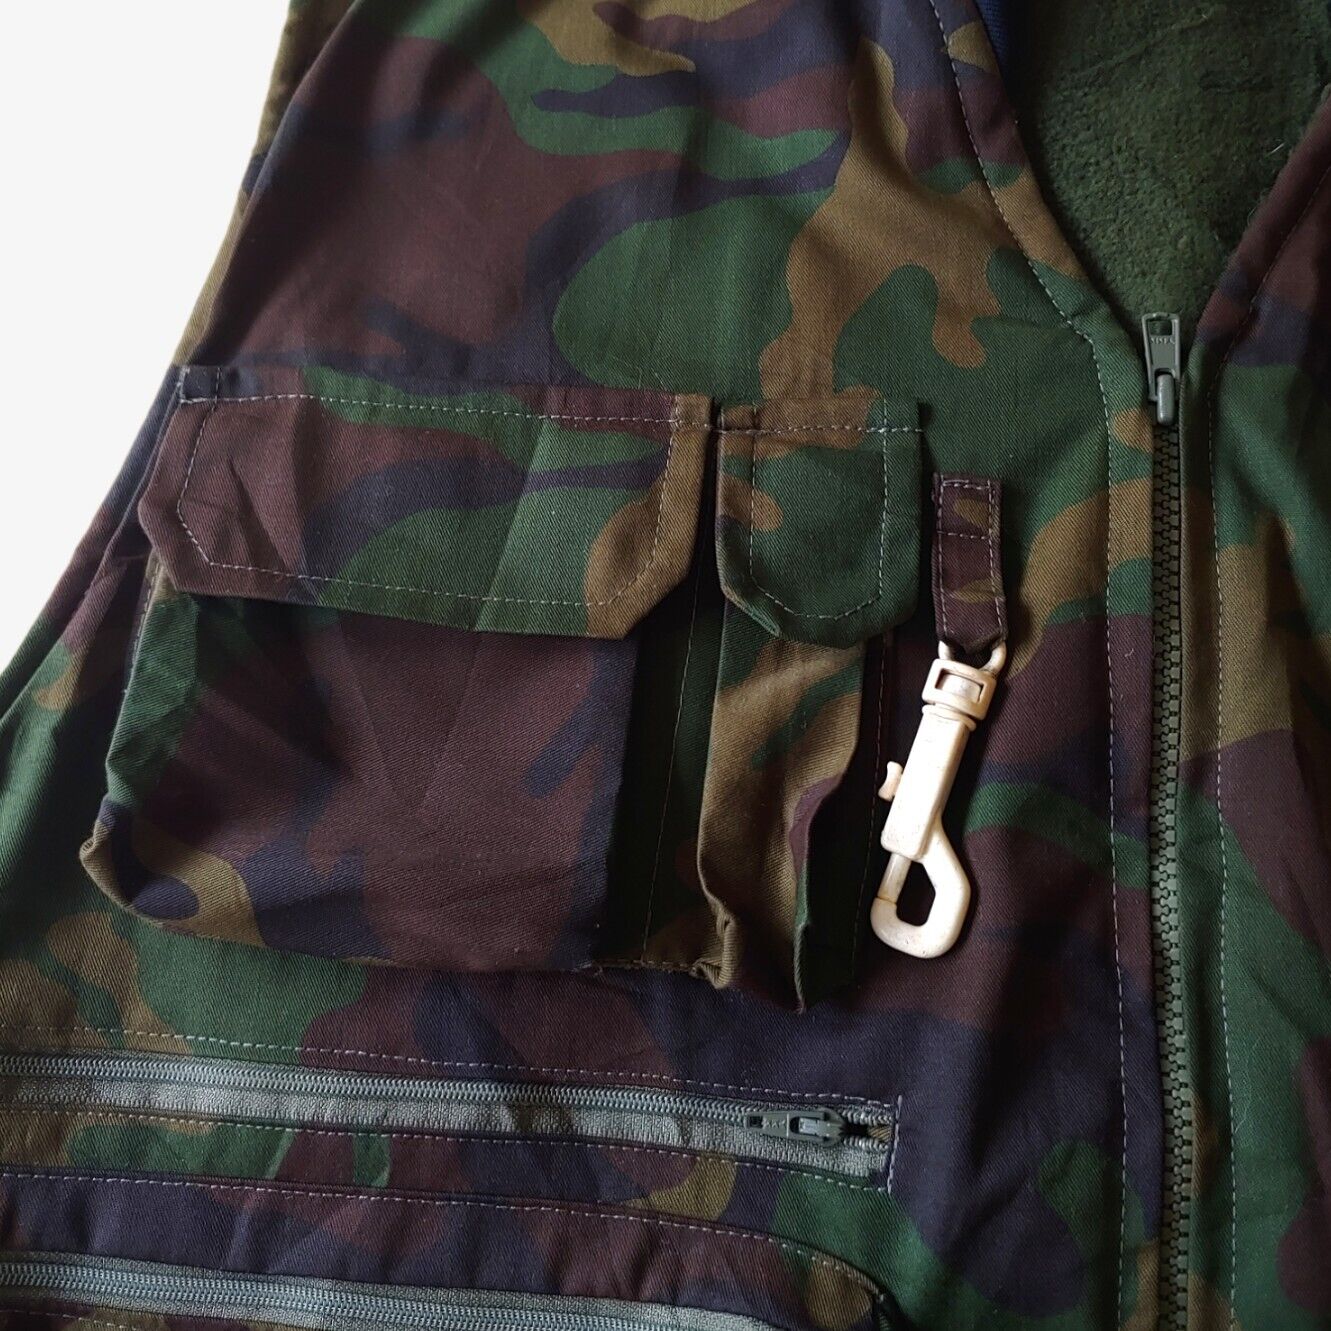 Vintage 1990s New Contrast Camouflage Hunting Utility Army Farmer Fishing Gilet Pocket - Casspios Dream